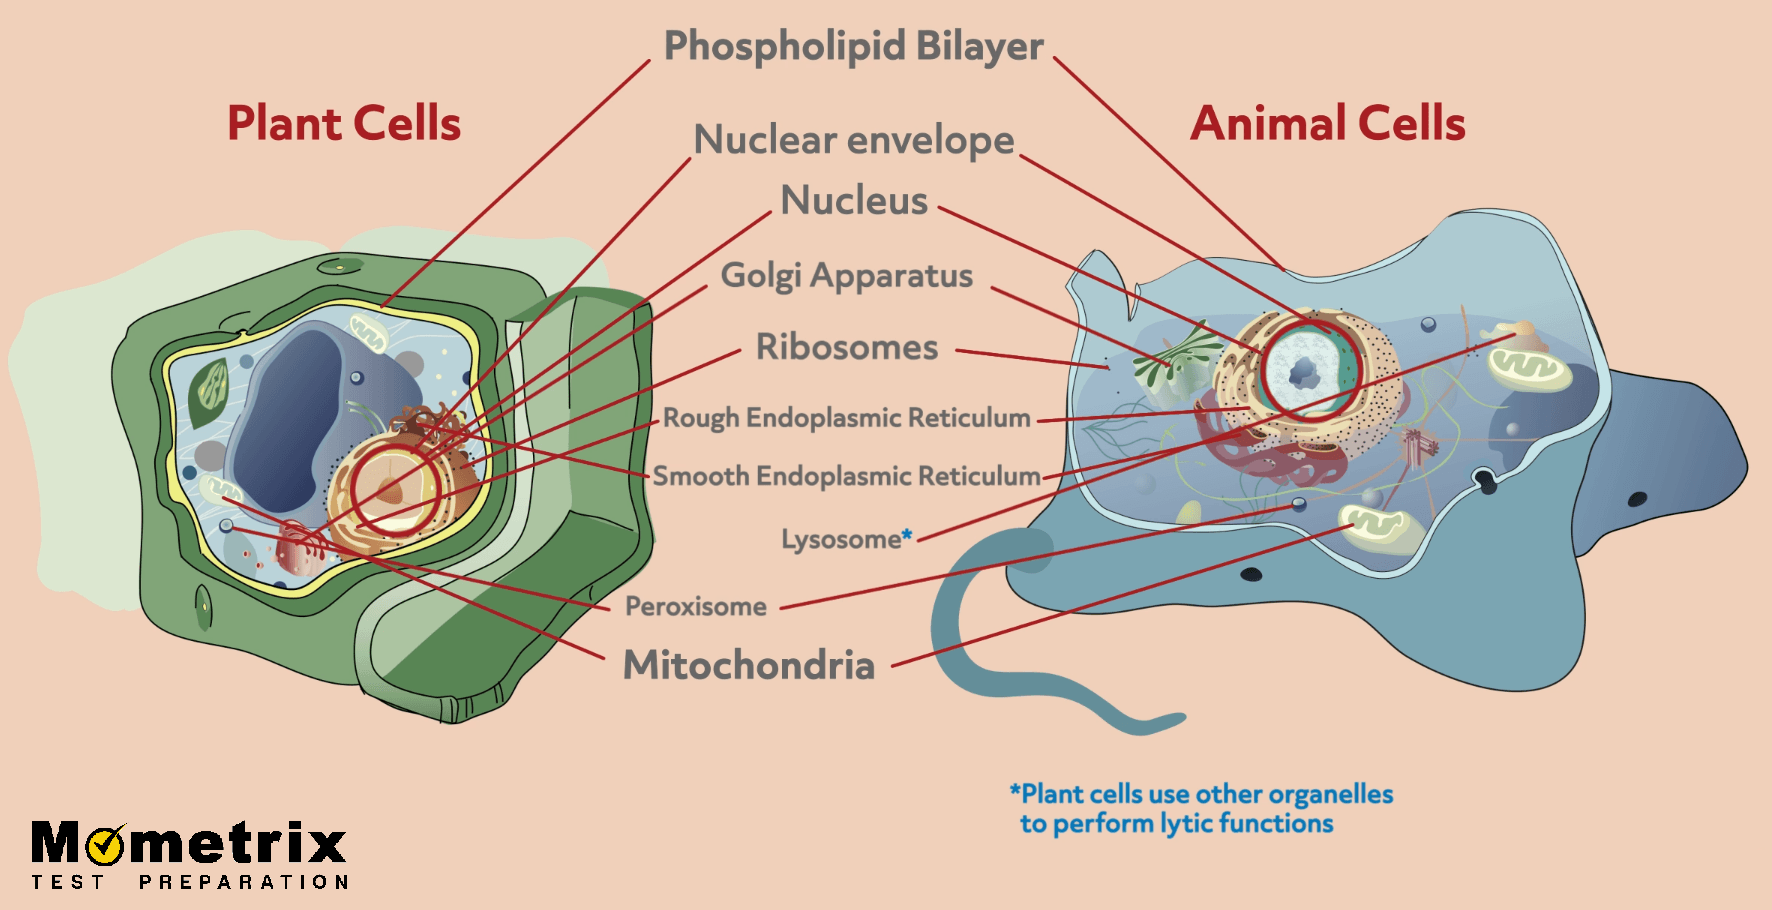 Difference Between Plant and Animal Cells (Video)